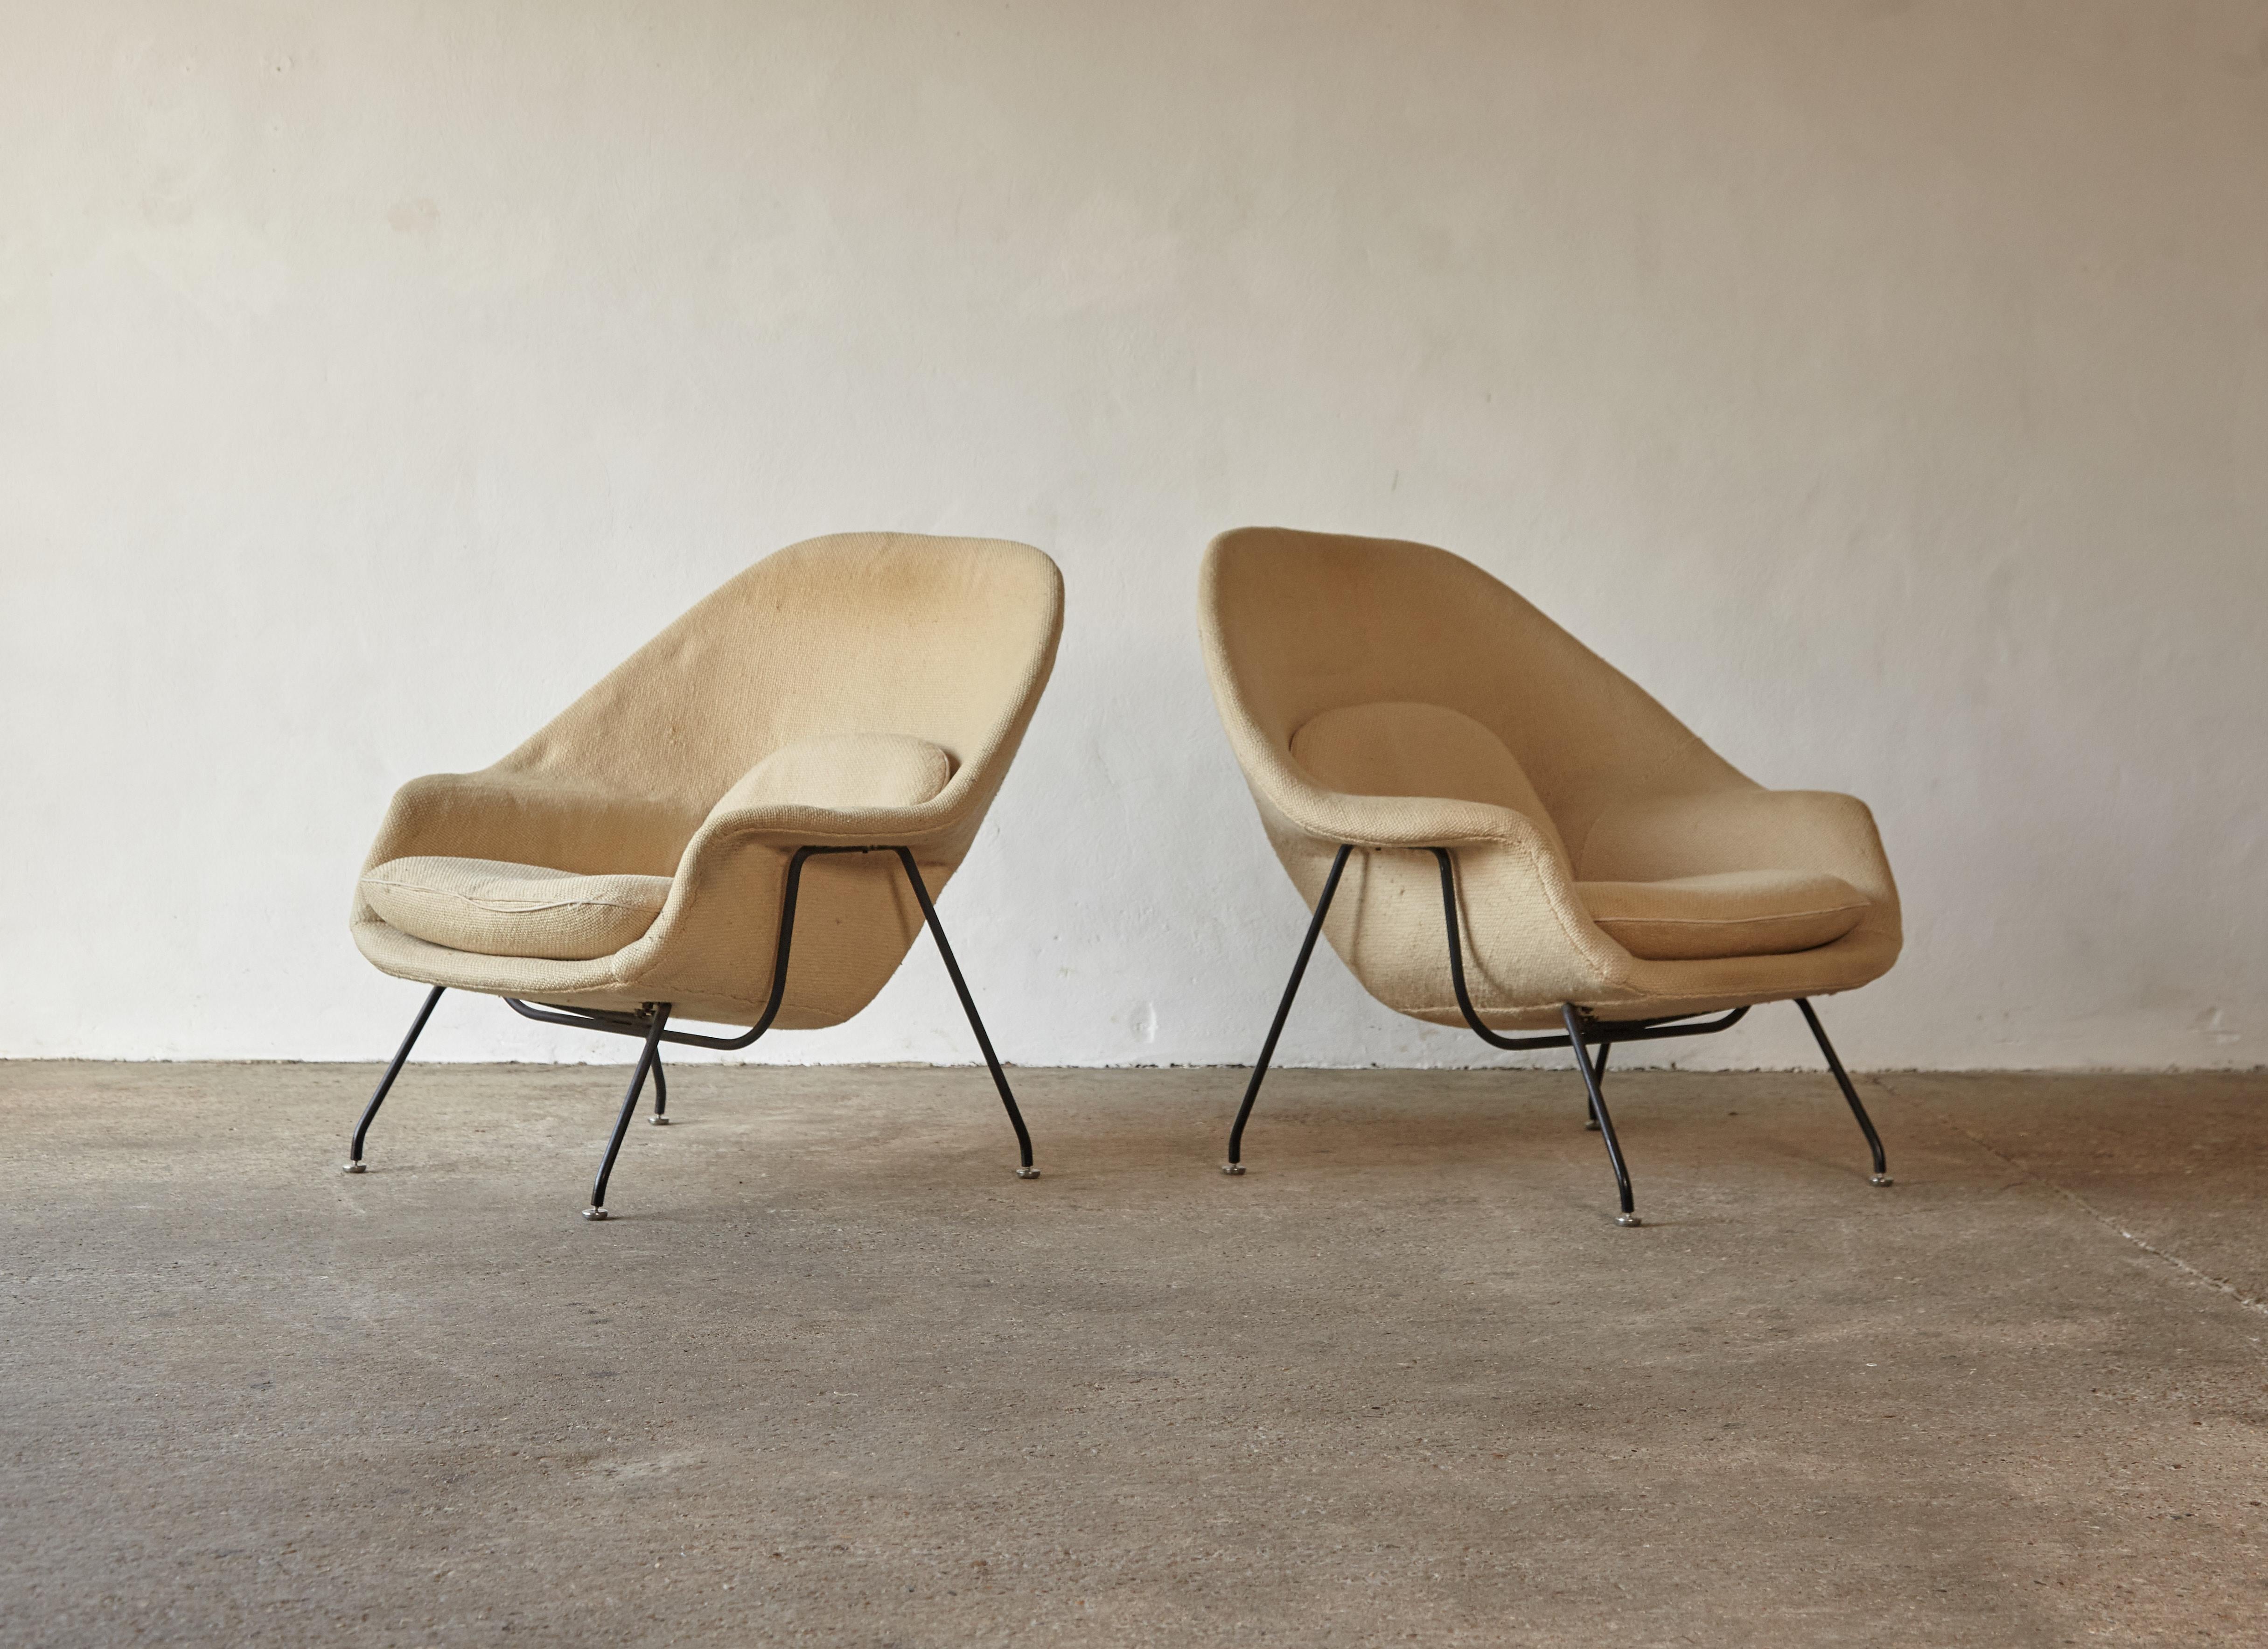 Rare Early Pair of Eero Saarinen Womb Chairs and Ottomans, Knoll, USA, 1950s For Sale 1